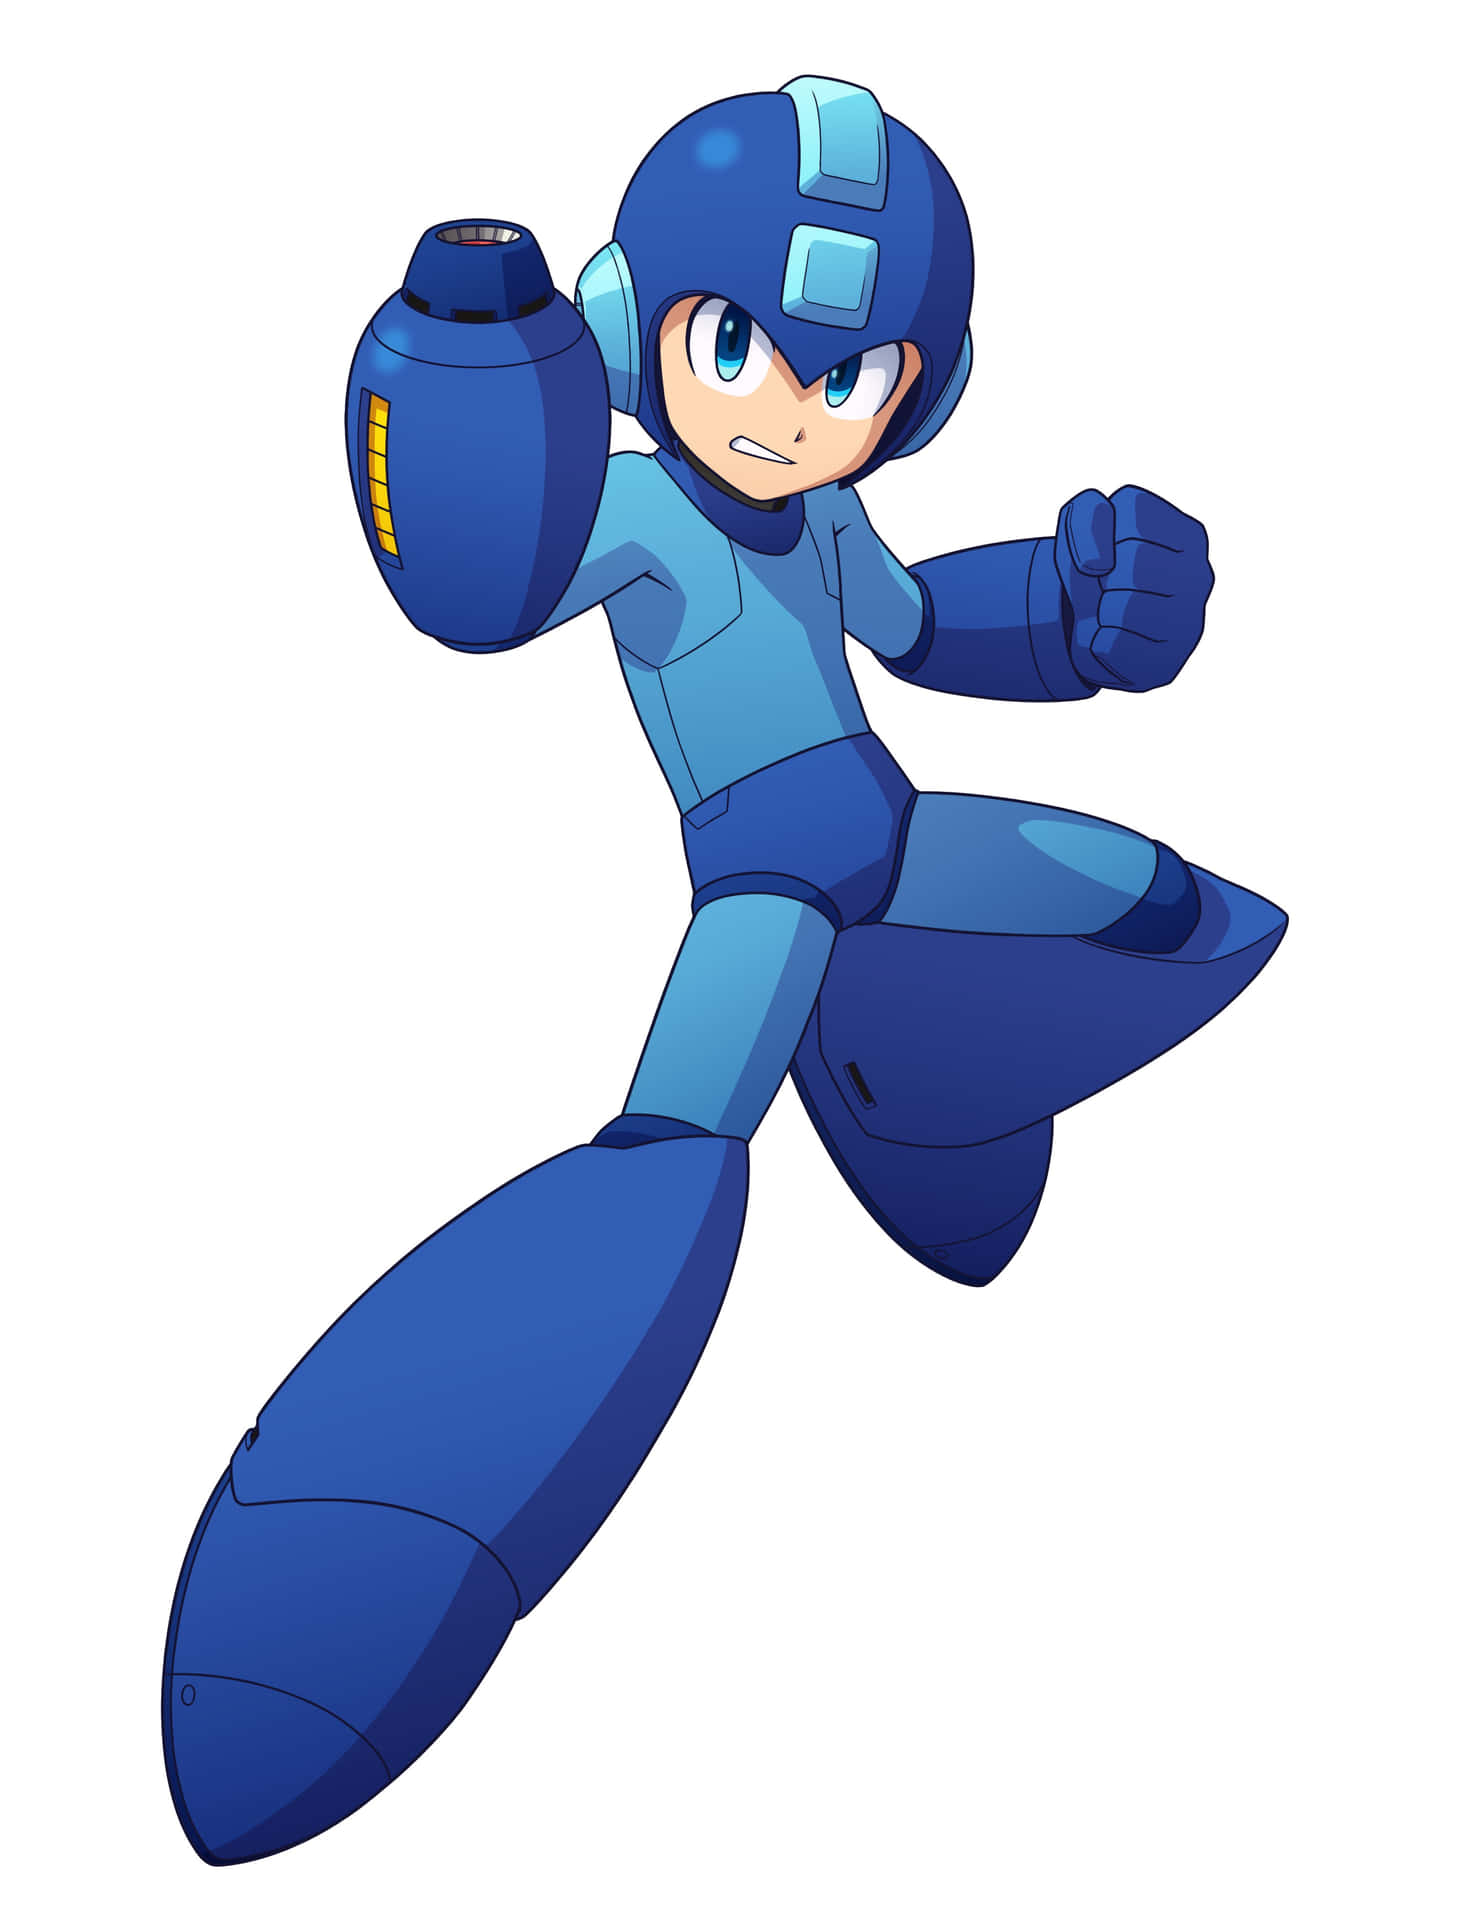 The iconic Megaman posing against a stunning backdrop.